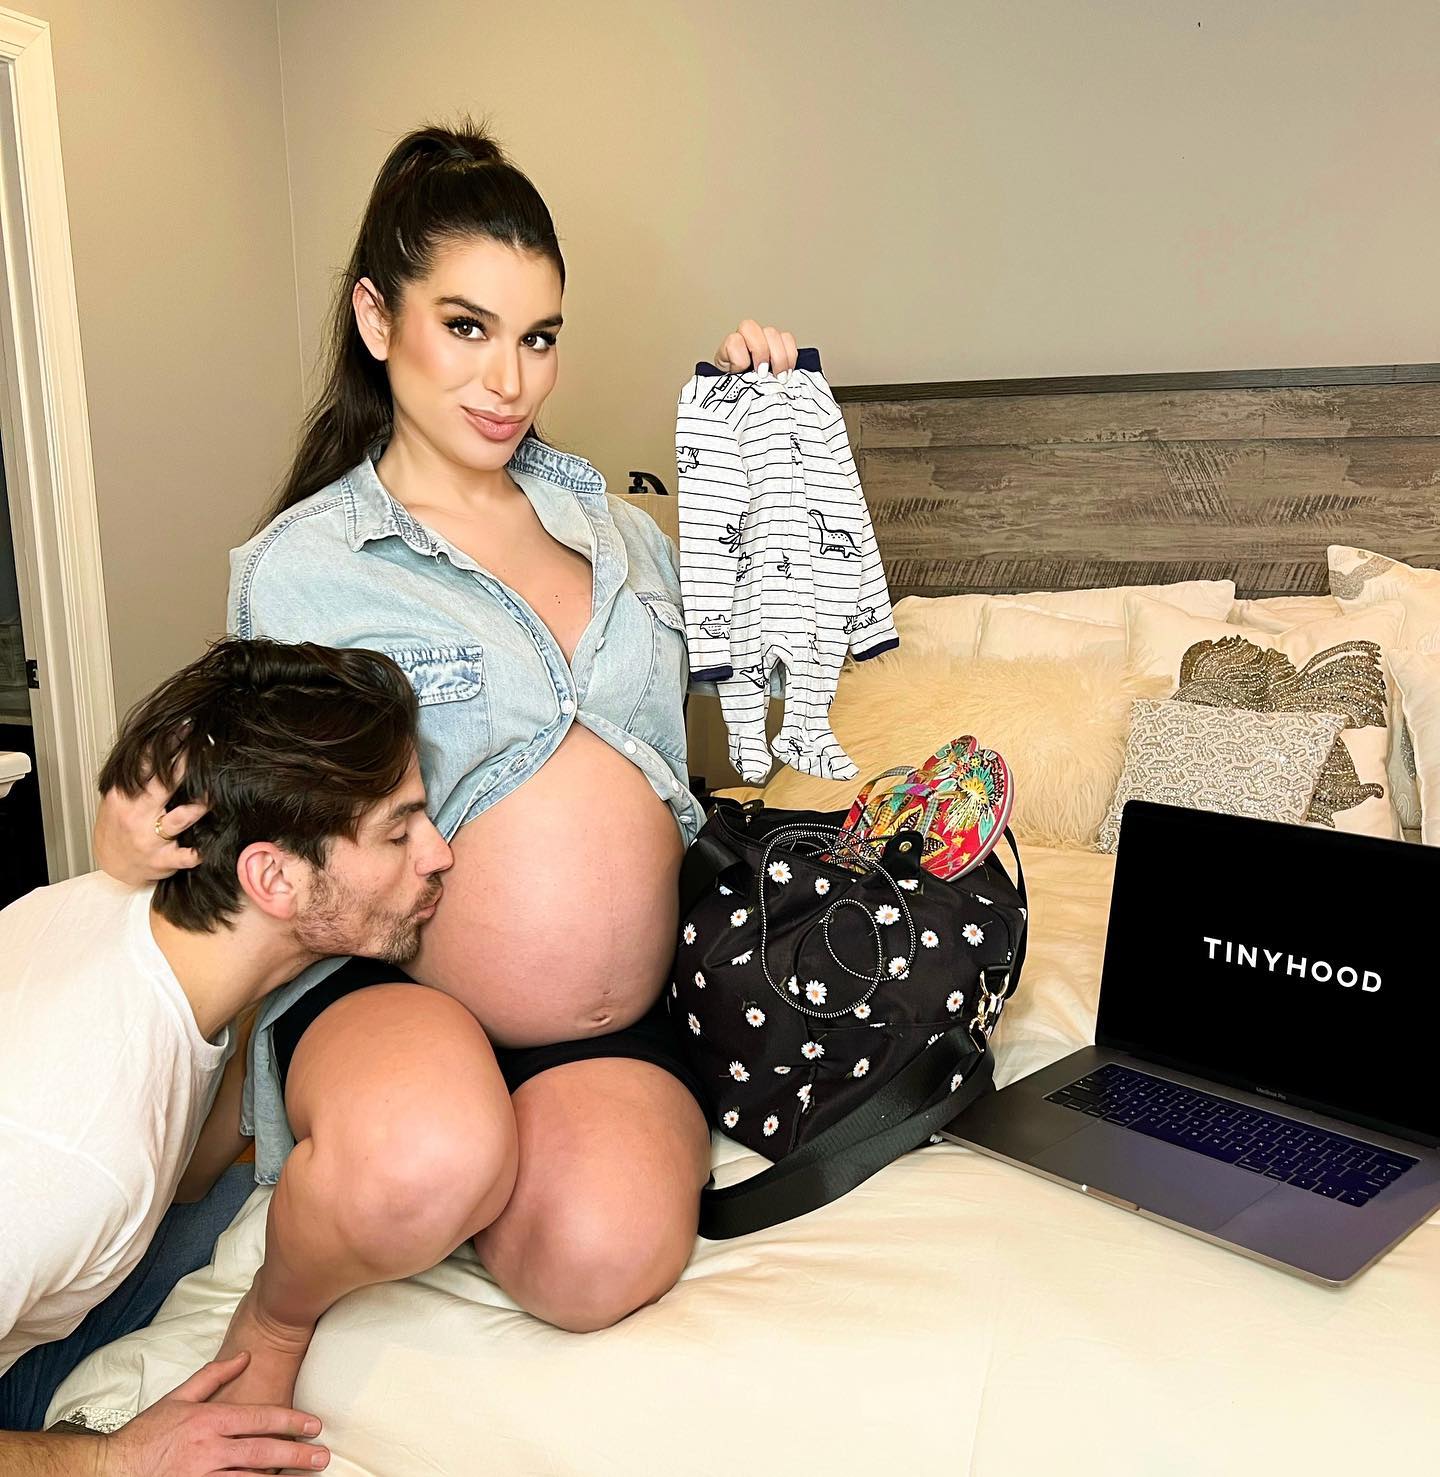 Bachelor in Paradises Pregnant Ashley Iaconettis Baby Bump Photos pic picture